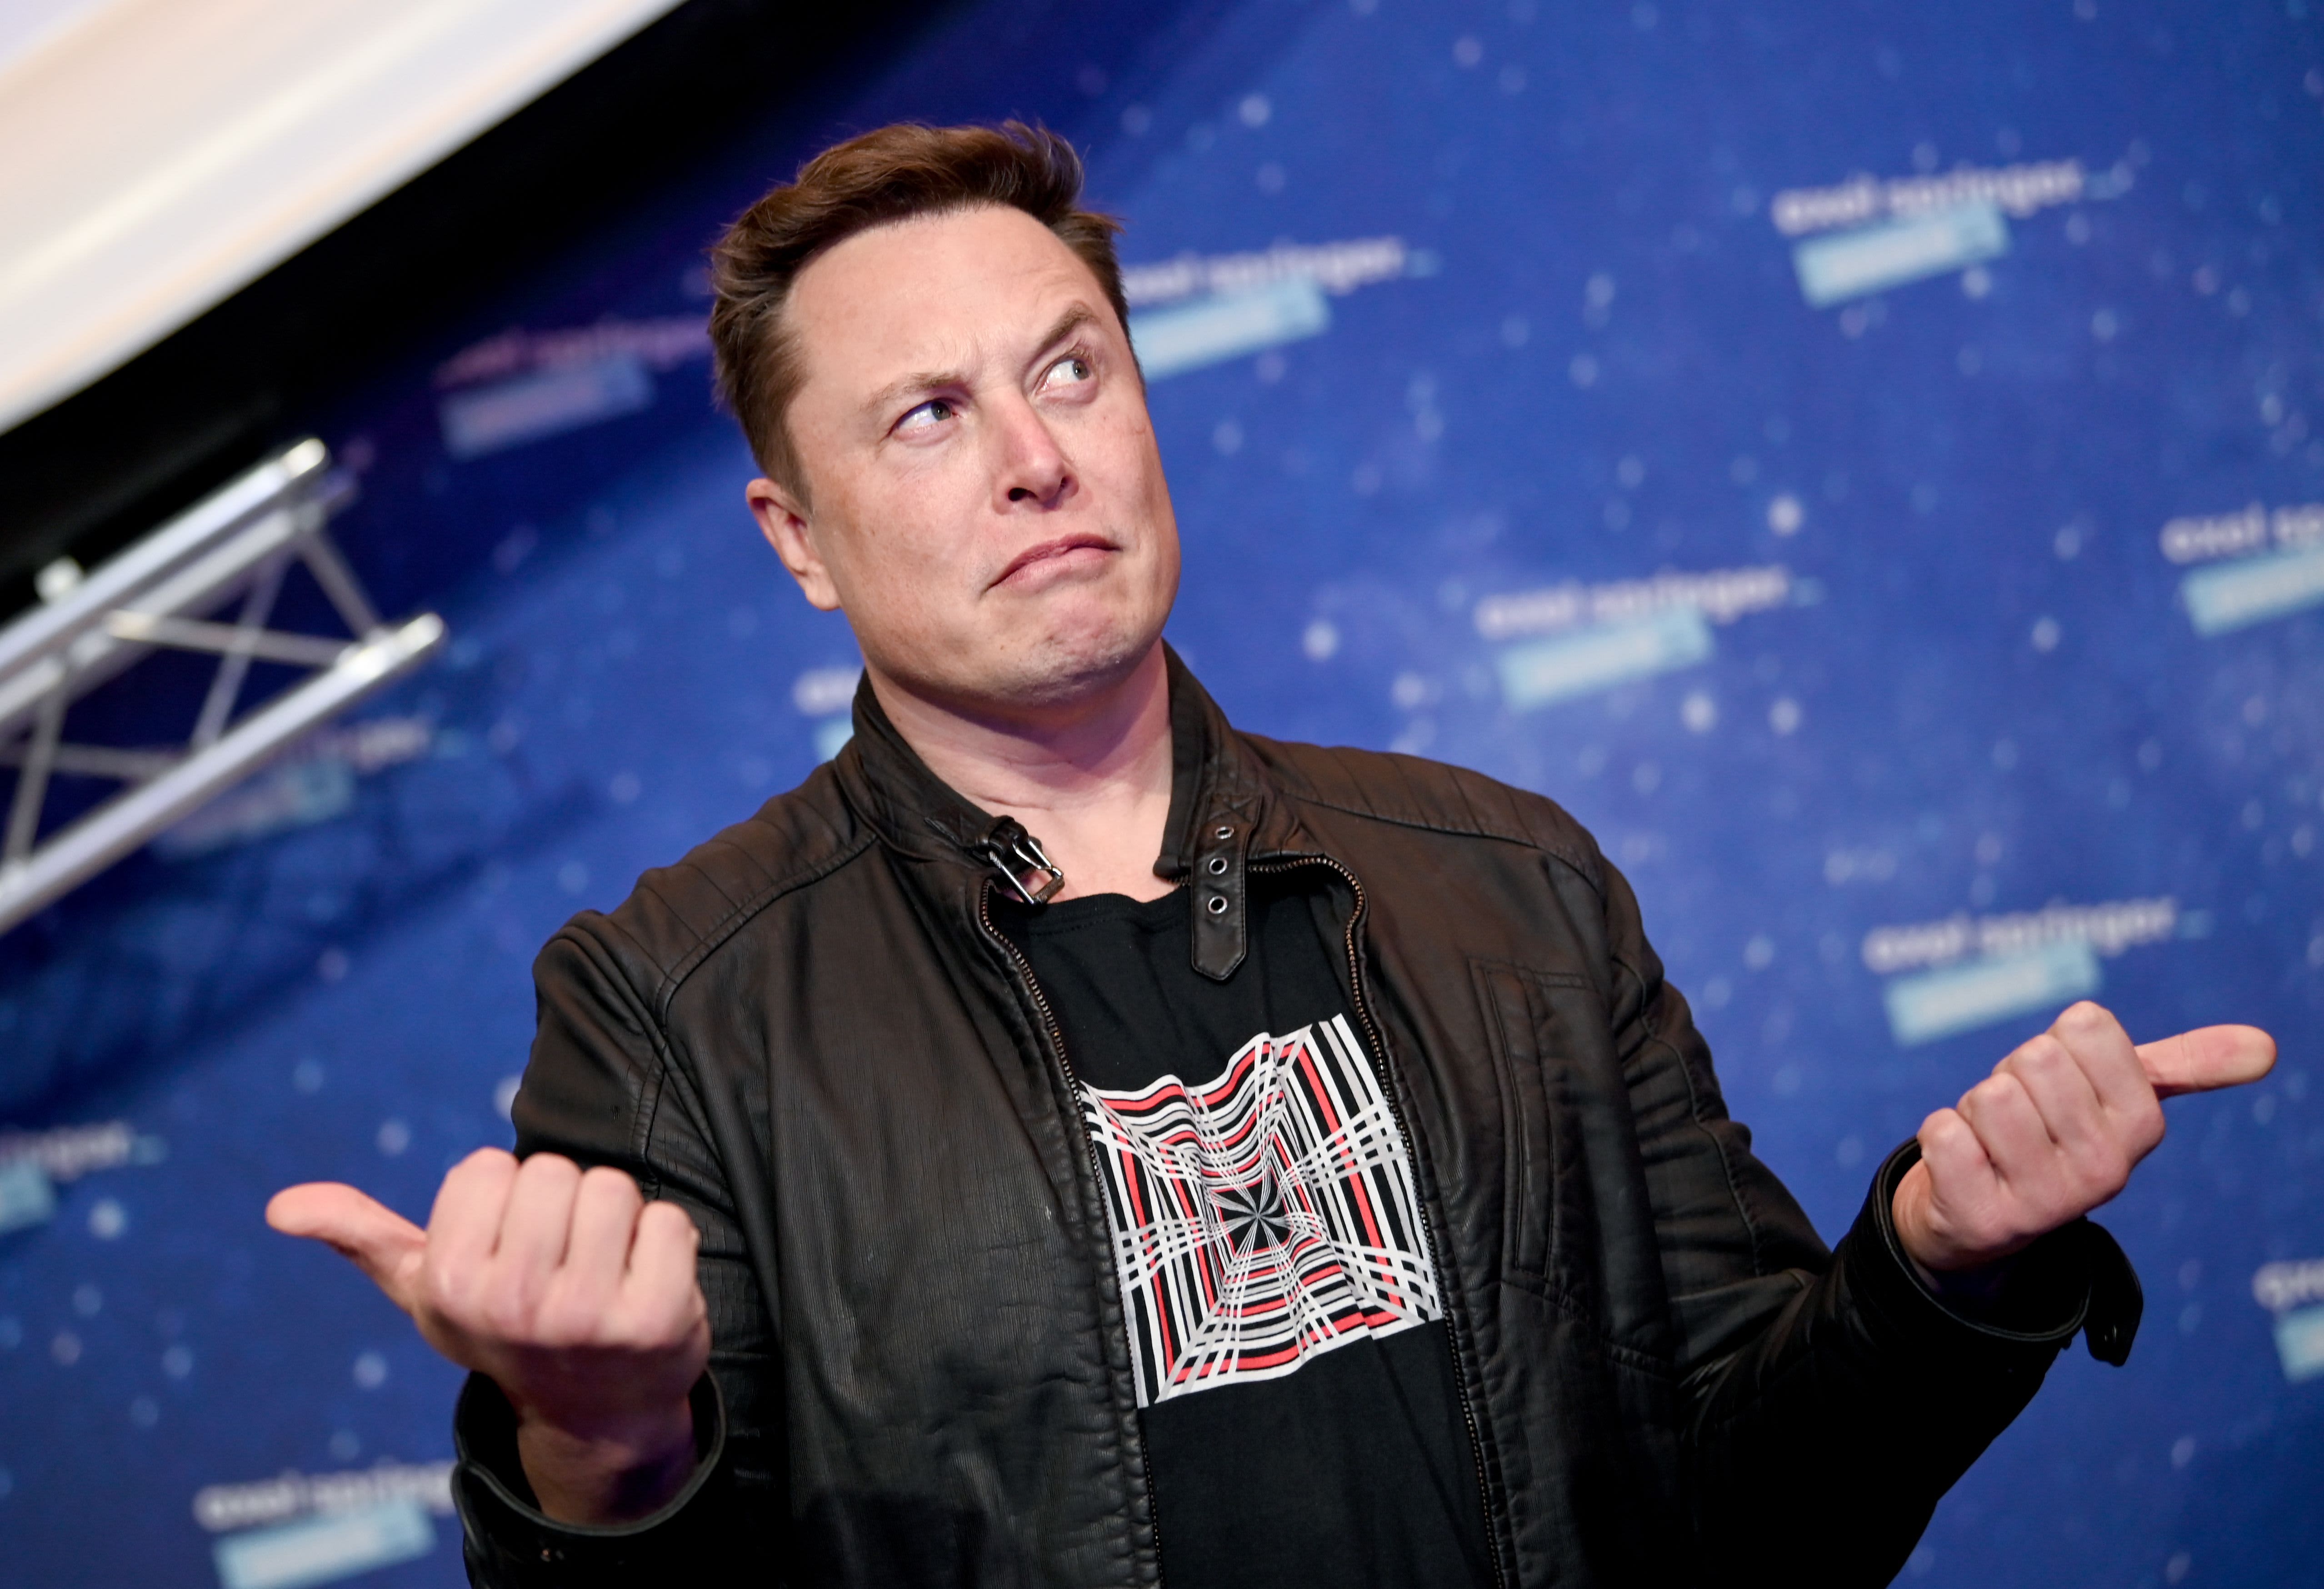 Elon Musk is offering to sell his tweet as an NFT